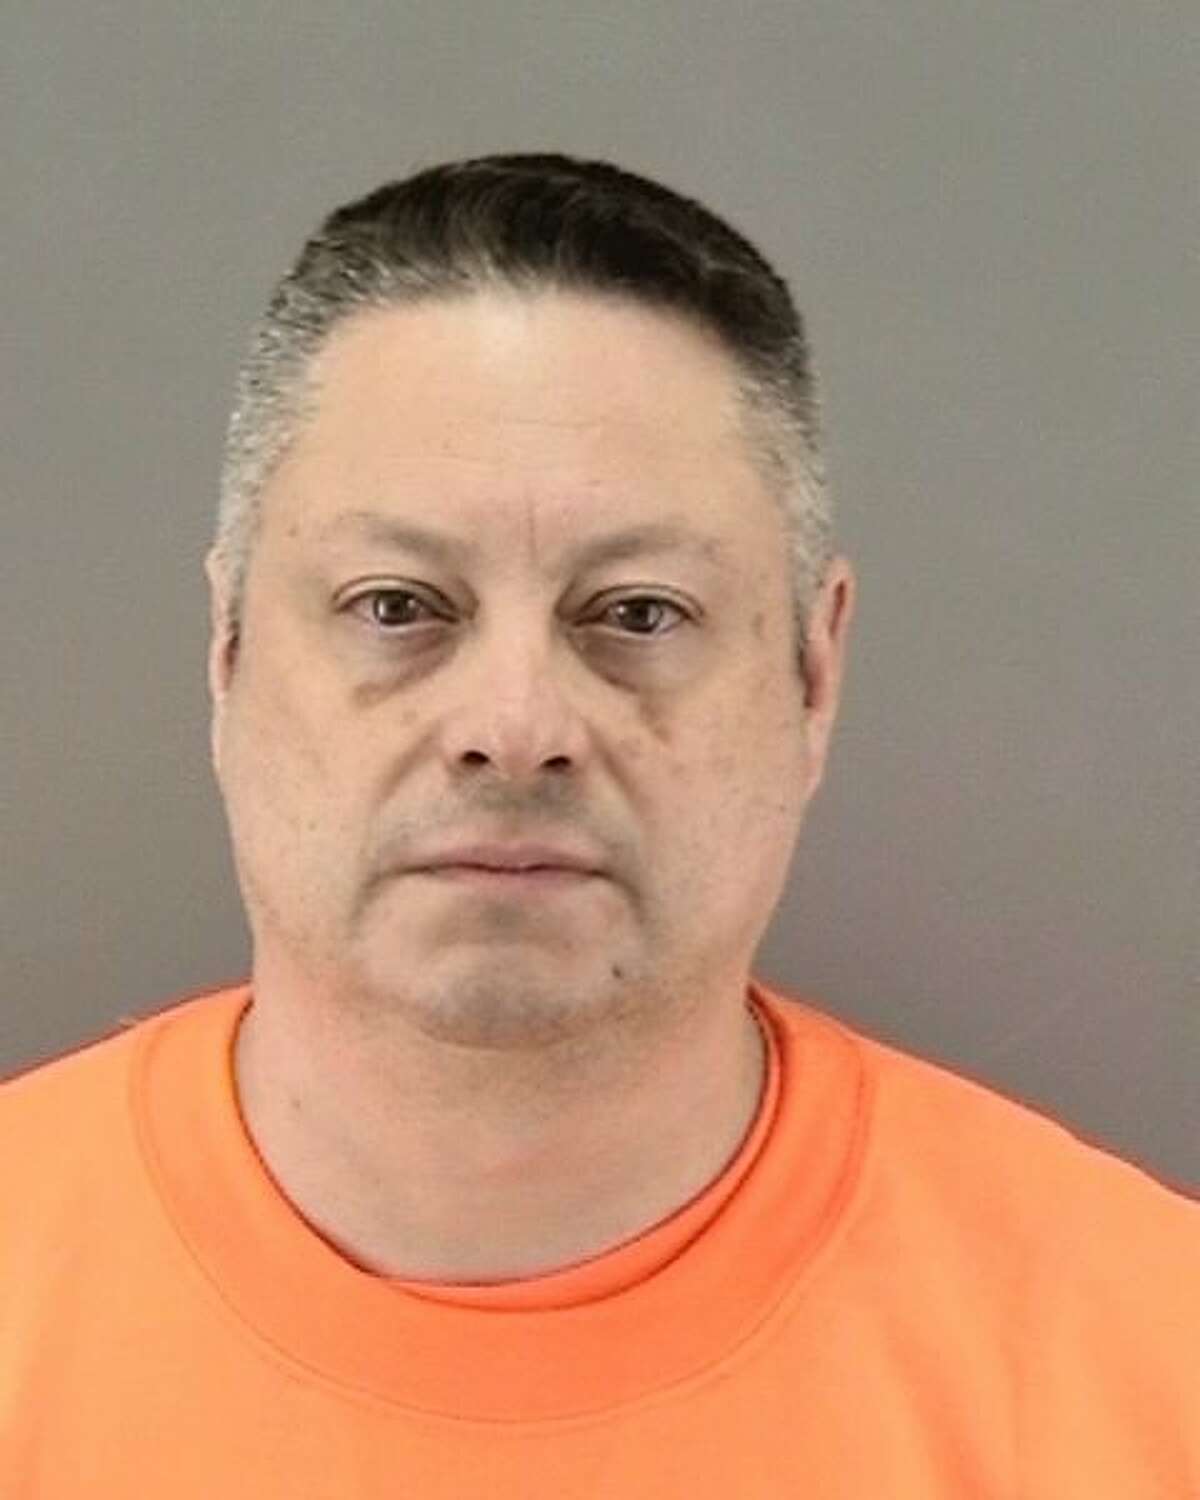 Thomas Ragsdale, 52, allegedly fatally shot his mother before barricading himself in the San Francisco home they shared in a 15-hour standoff with the police on July 31, 2017. San Francisco police officers confiscated a cache of weapons from Ragsdale less than two months before the standoff when they placed him in an involuntary mental health hold.